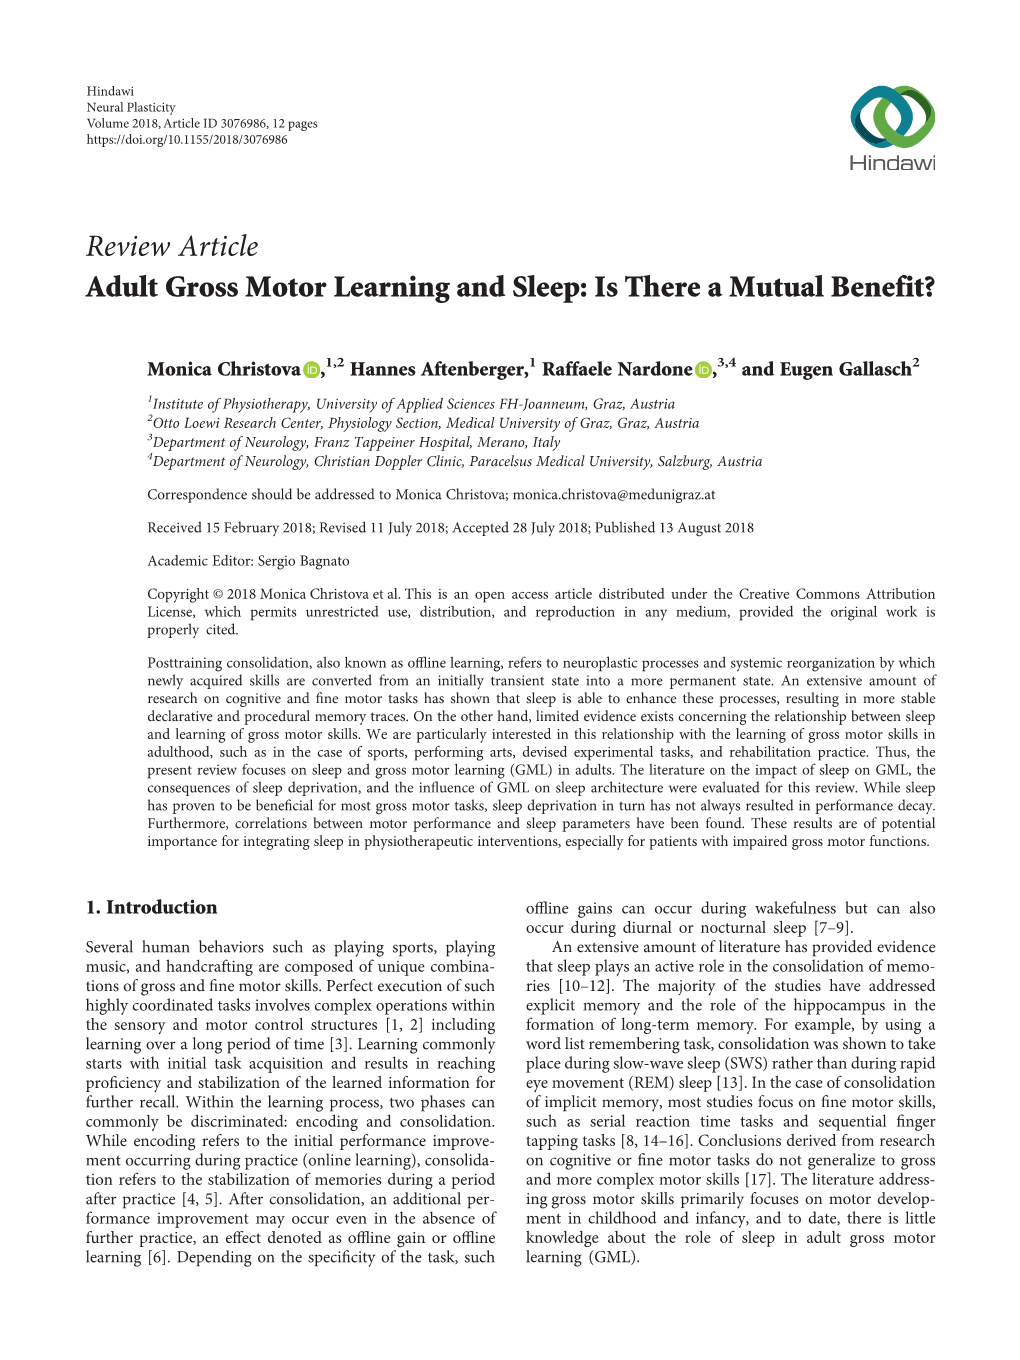 Adult Gross Motor Learning and Sleep: Is There a Mutual Benefit?